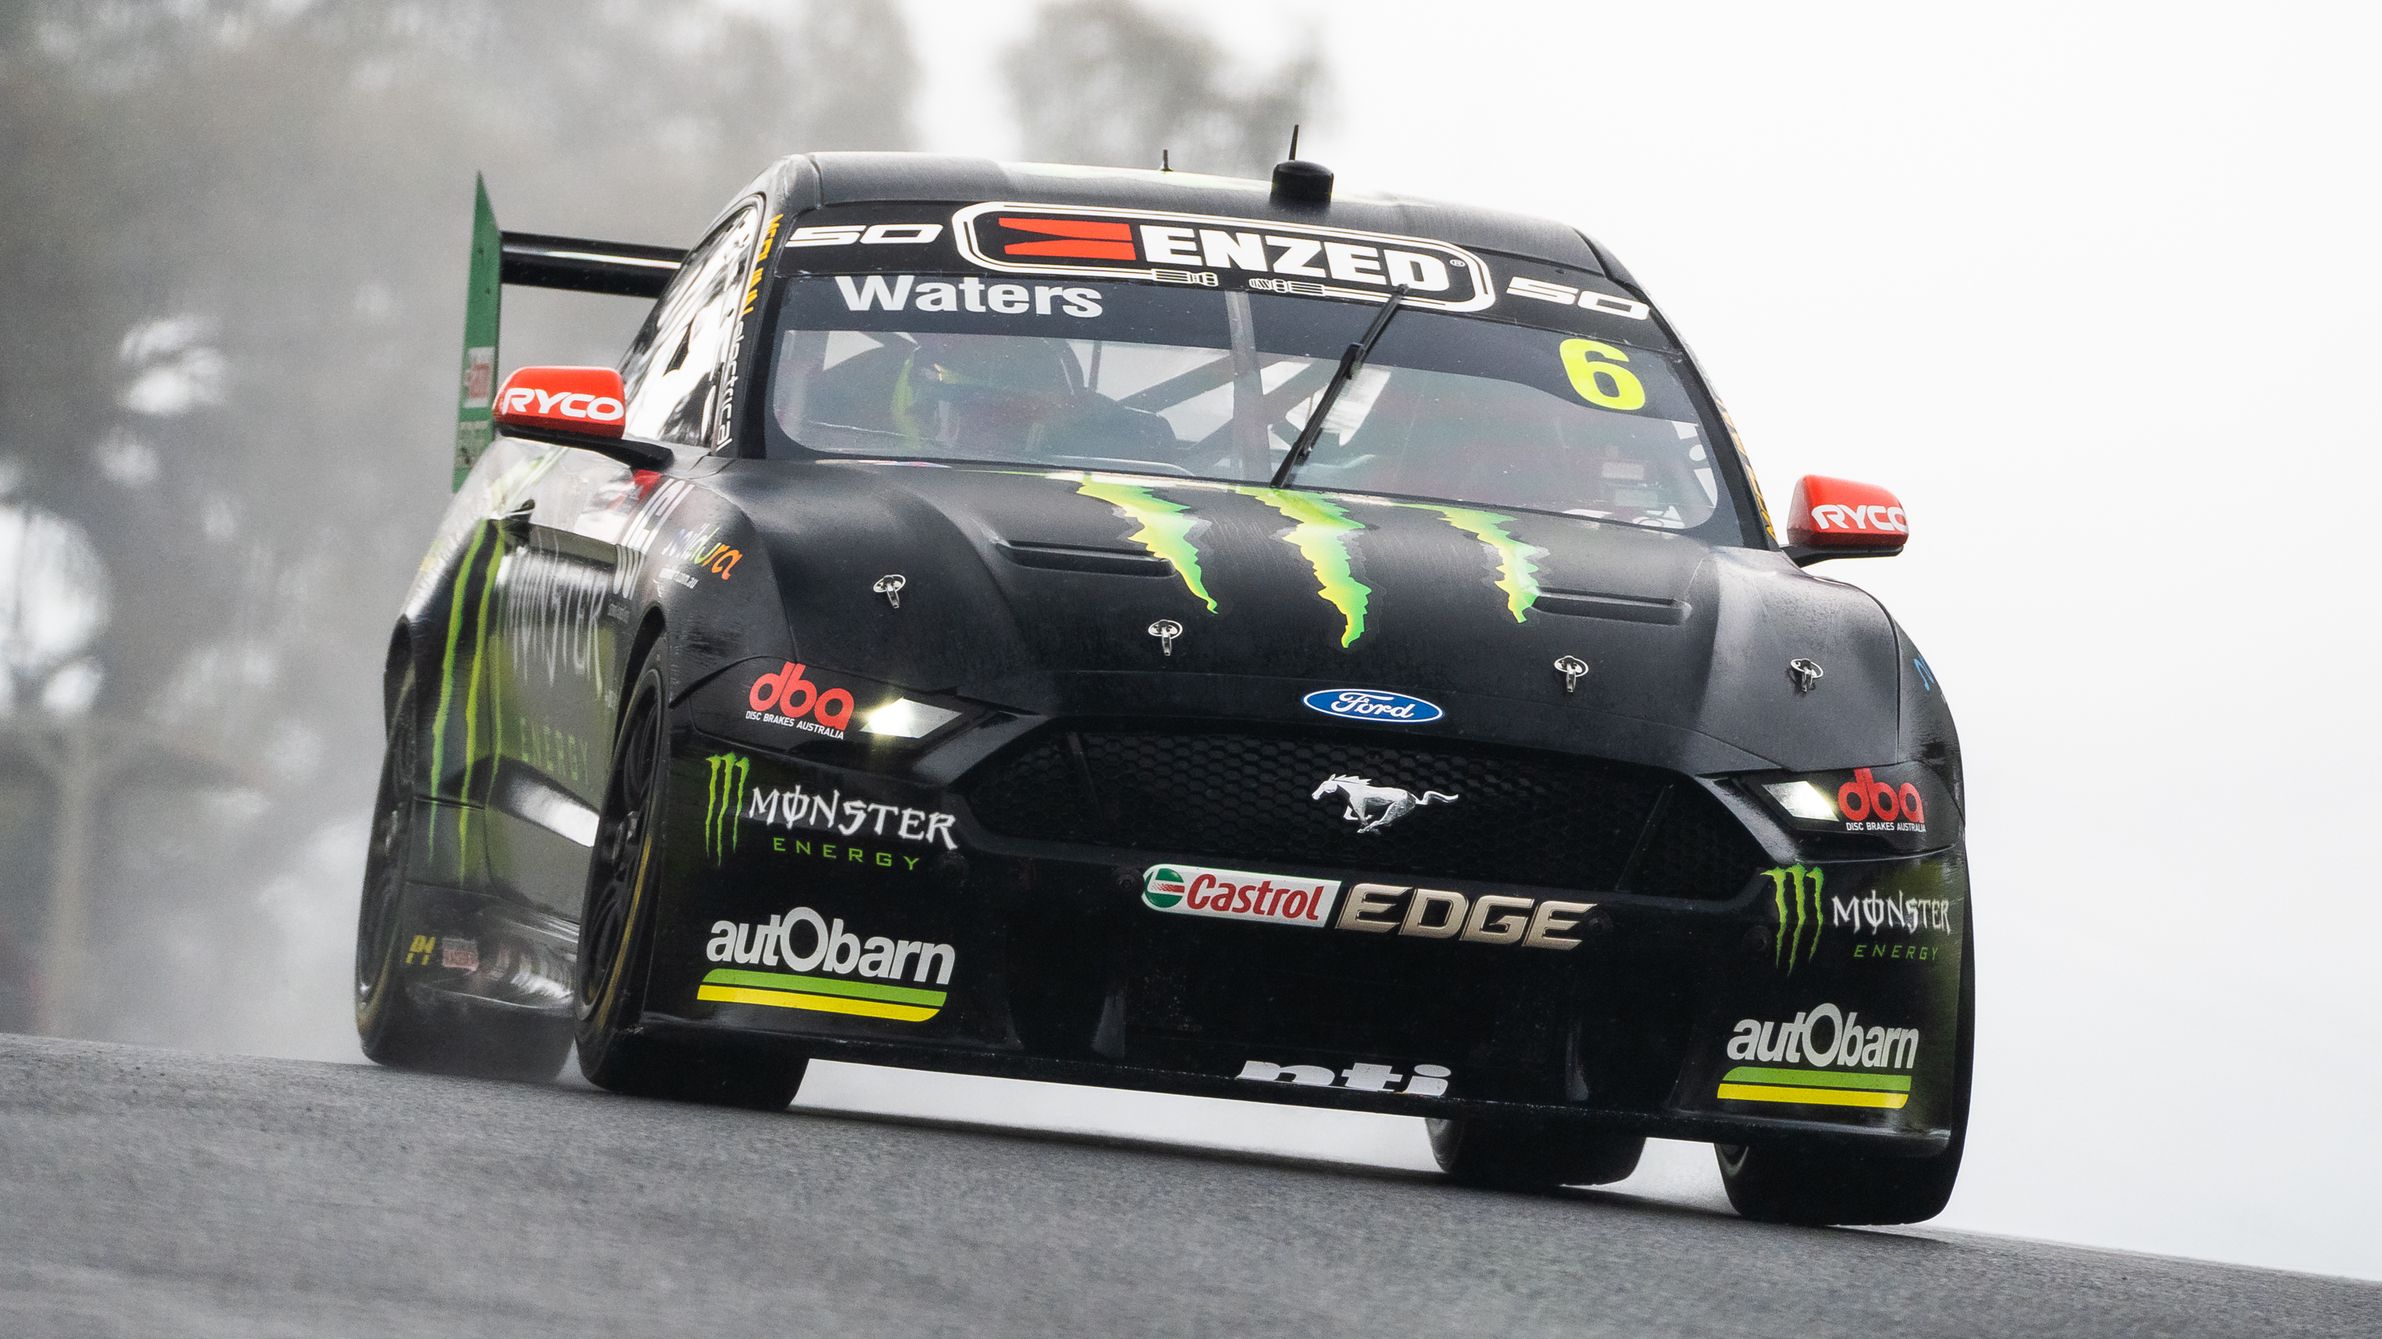 Cameron Waters driver of the #6 Monster Energy Racing Ford Mustang during practice for the Bathurst 1000, which is race 30 of 2022 Supercars Championship Season at Mount Panorama on October 08, 2022 in Bathurst, Australia. (Photo by Daniel Kalisz/Getty Images)